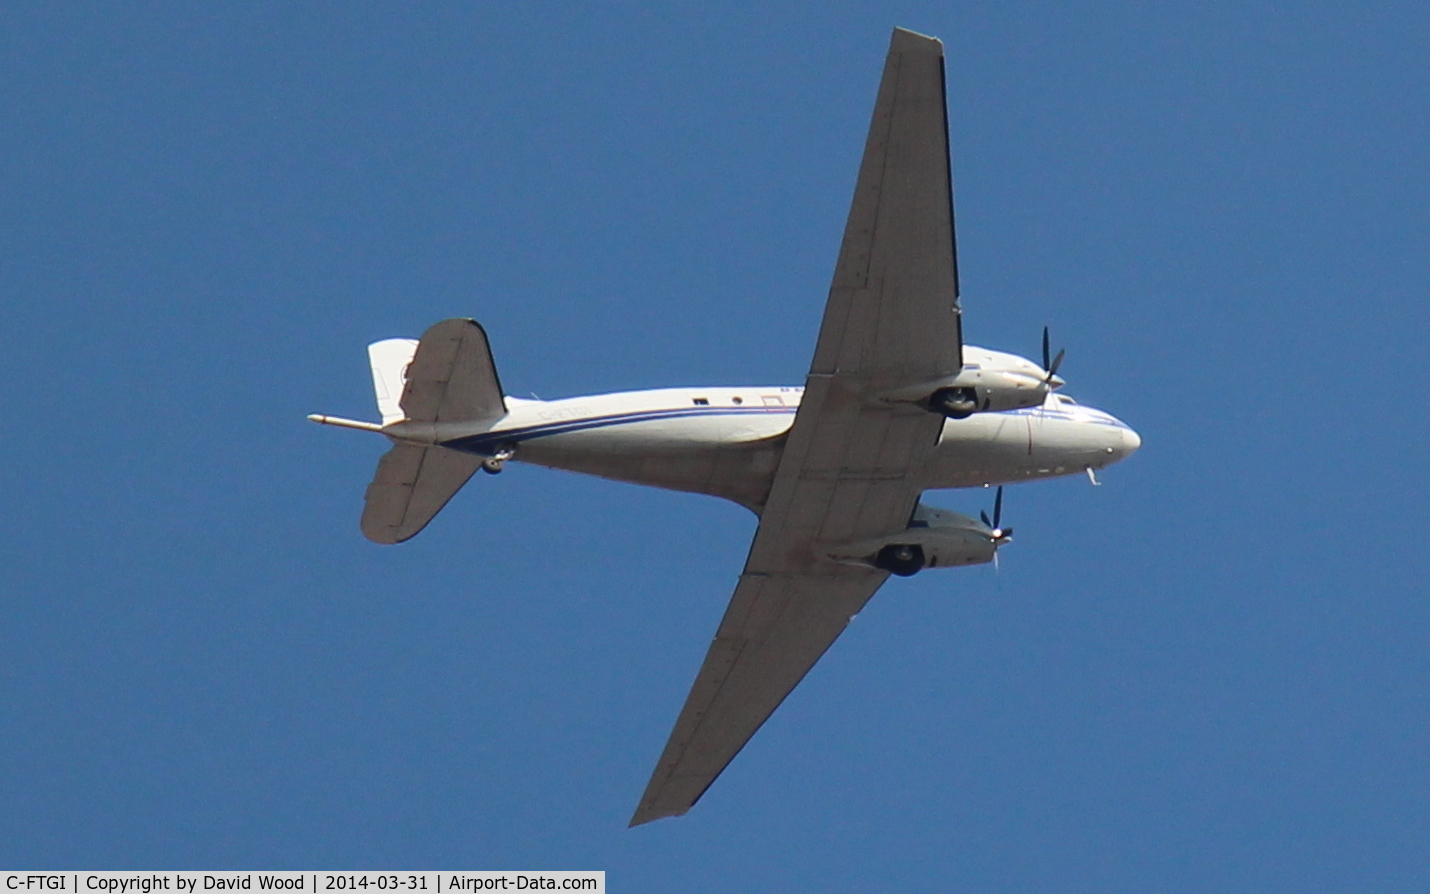 C-FTGI, 1944 Basler BT-67 C/N 26268, Beautiful plane!  This one flew over me twice just after 15:00 Hrs EDT on March 31st, 2014... this was the second pass.  This shot was taken in Whitby Ontario, and was likely heading into the Oshawa Airport.